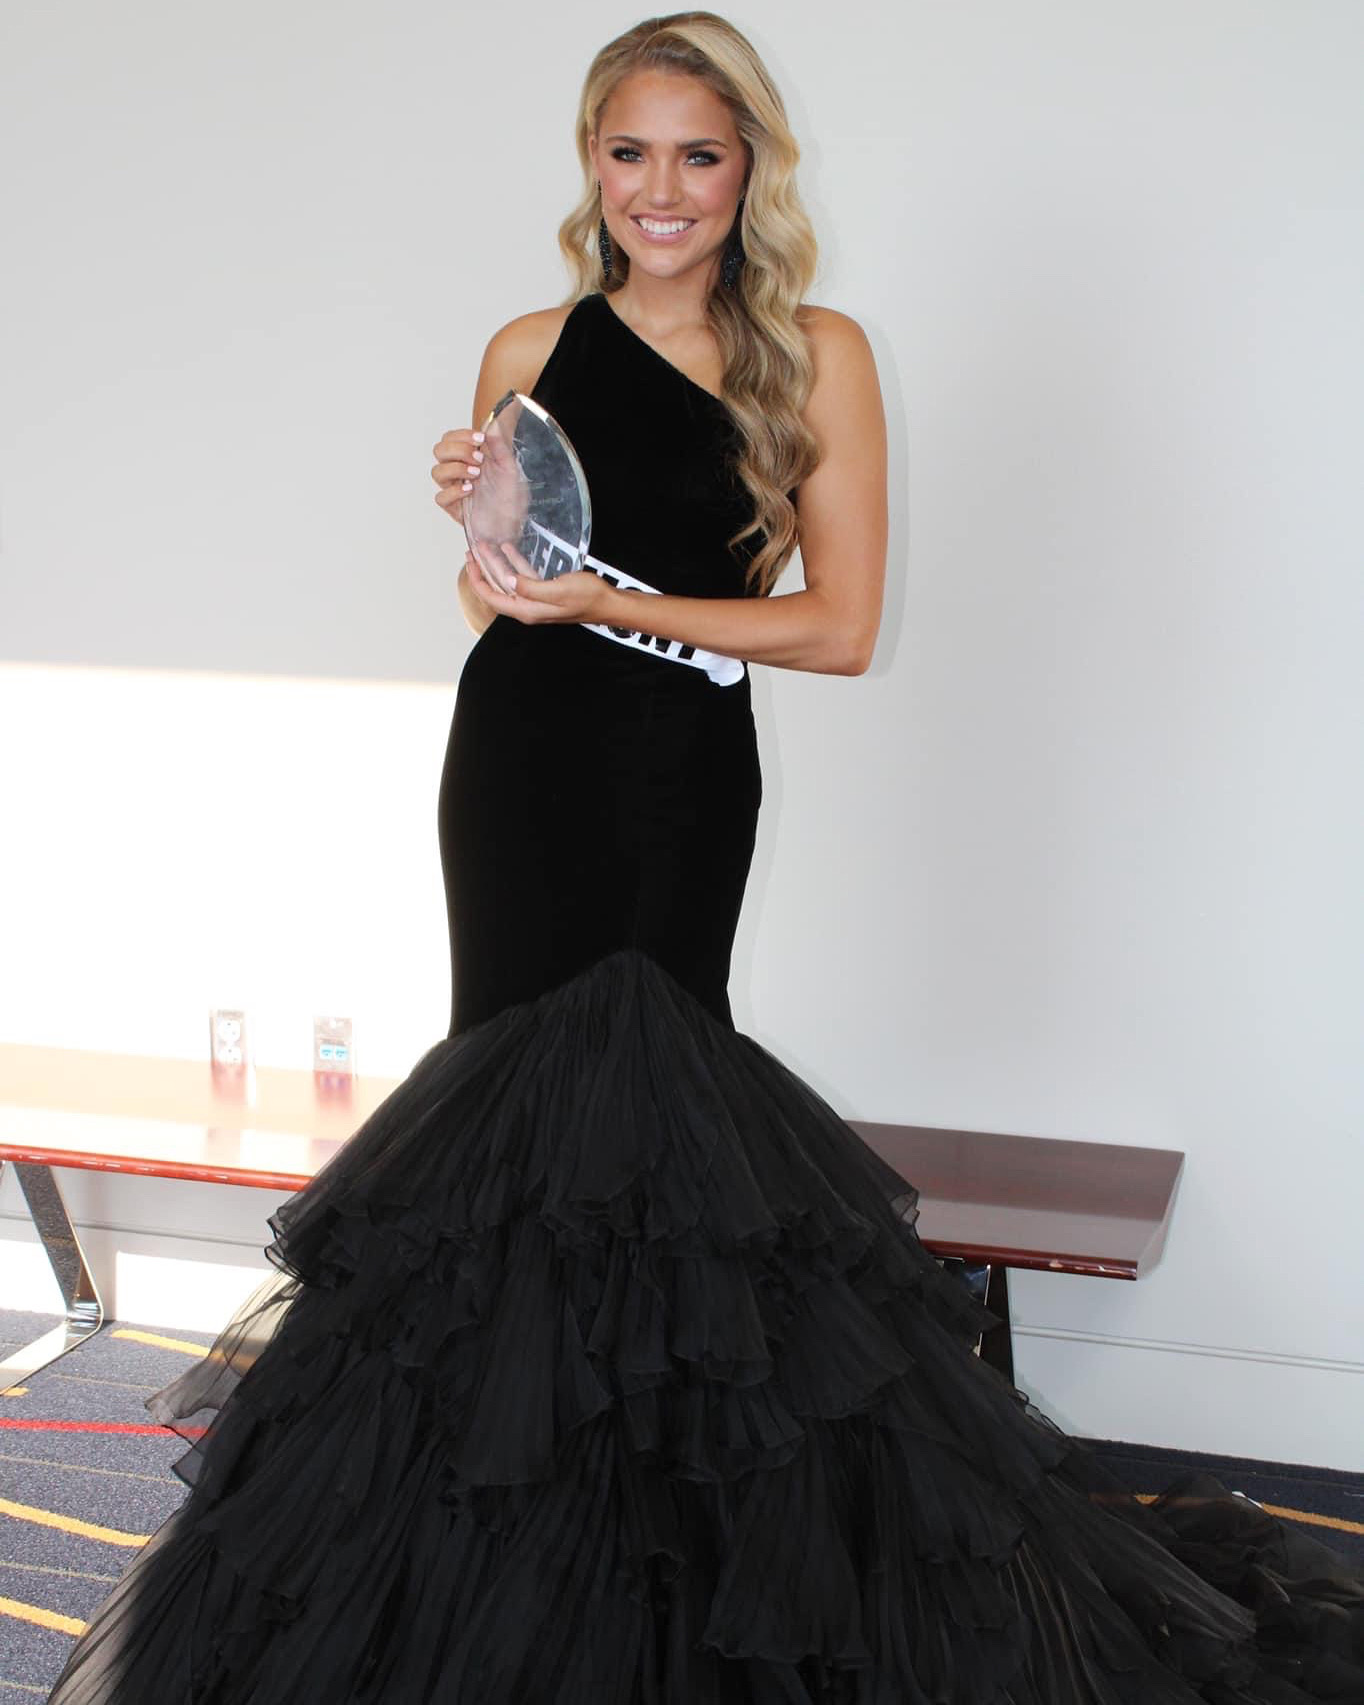 4th runner up to Miss Collegiate America